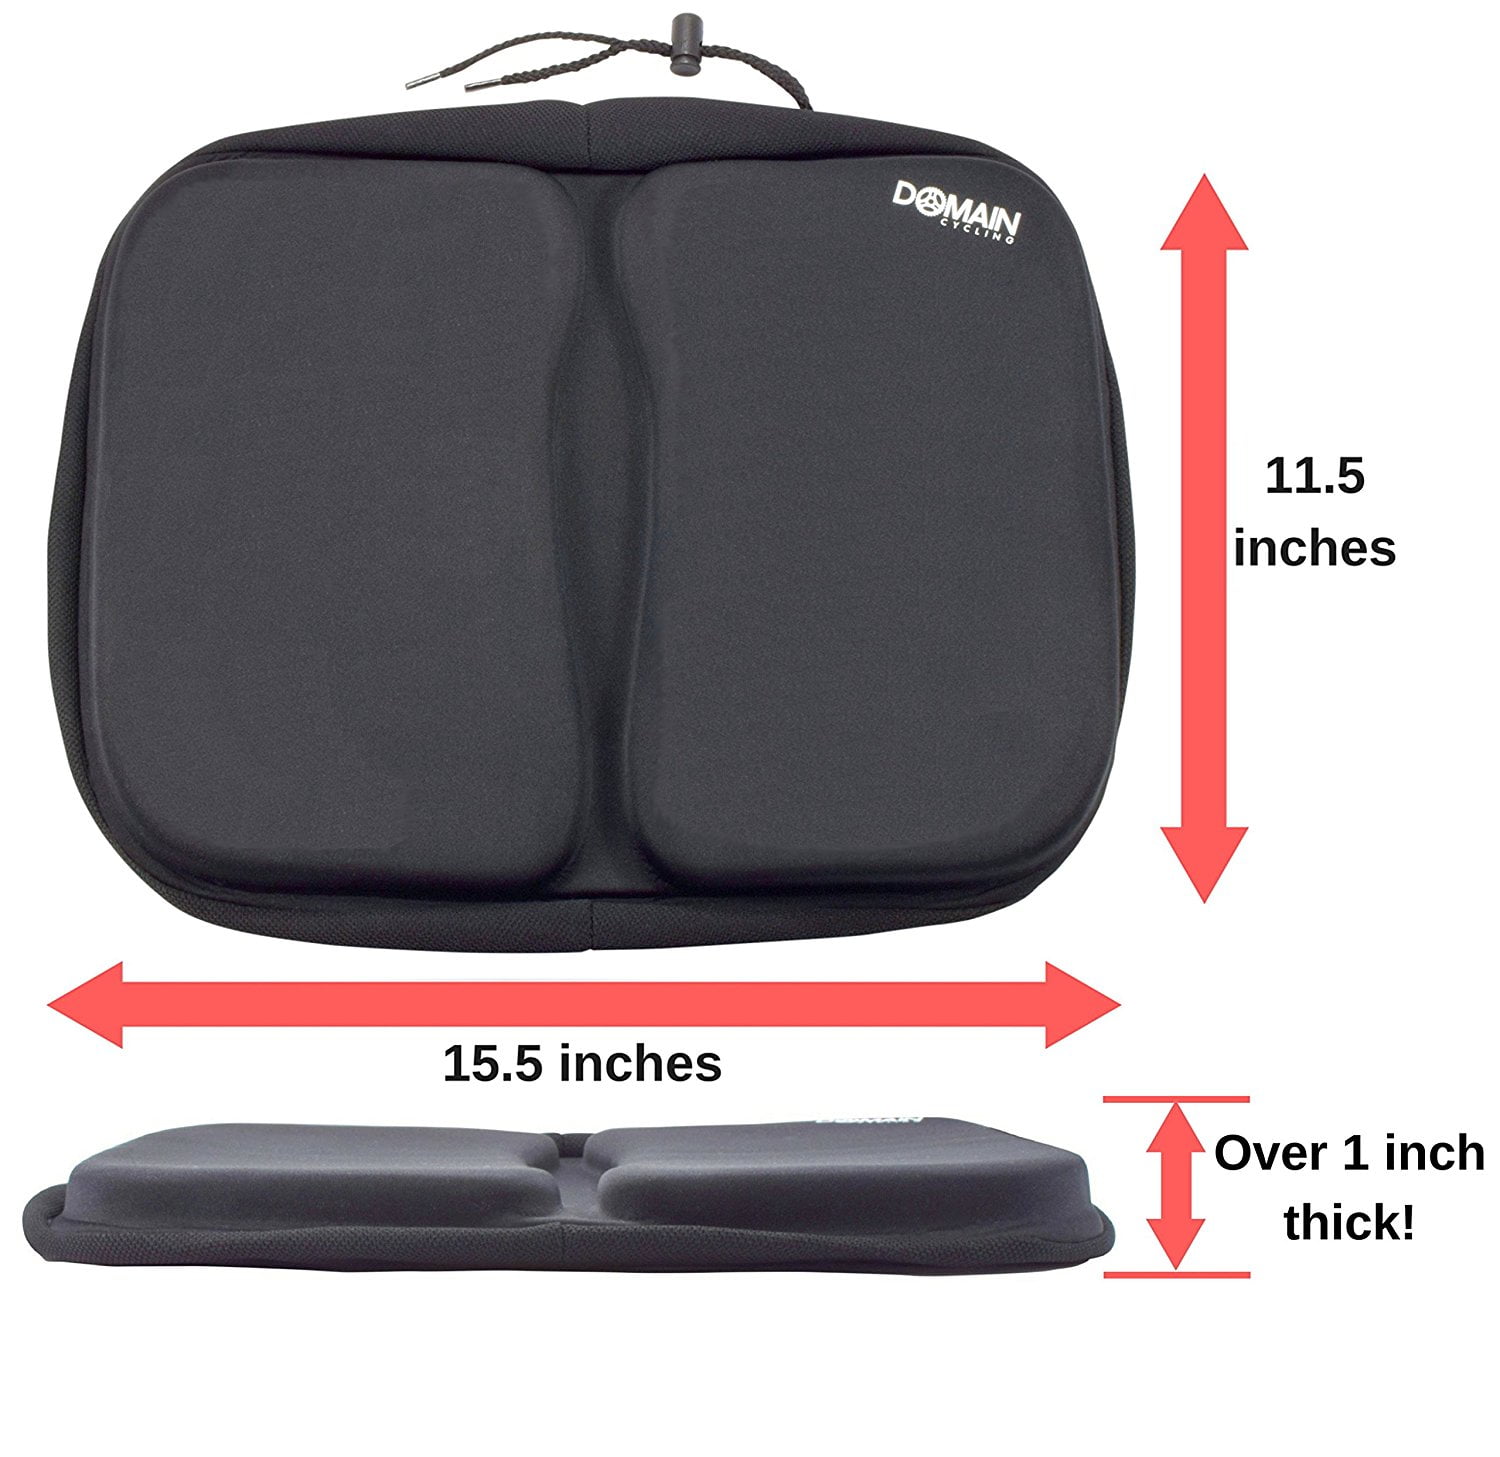 gel seat covers for exercise bikes